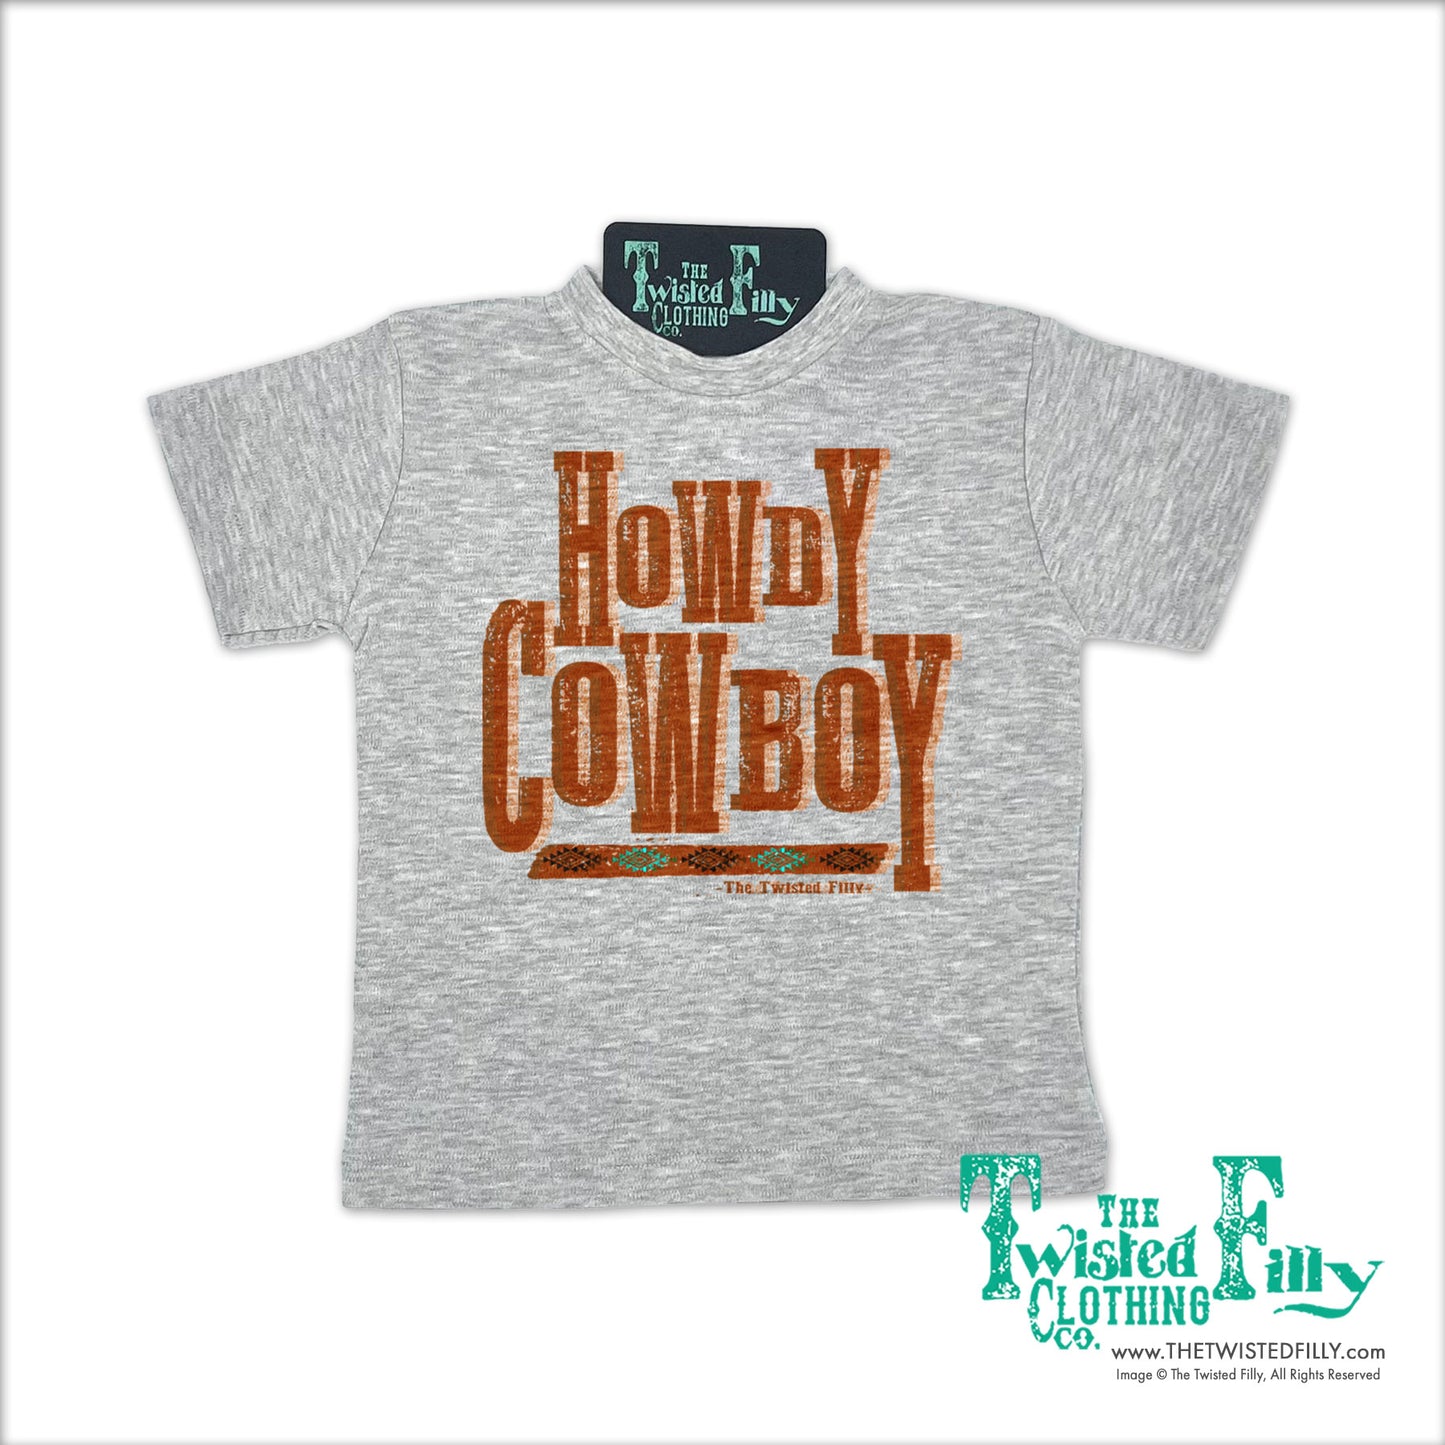 Howdy Cowboy - S/S Girls Toddler Tee - Assorted Colors